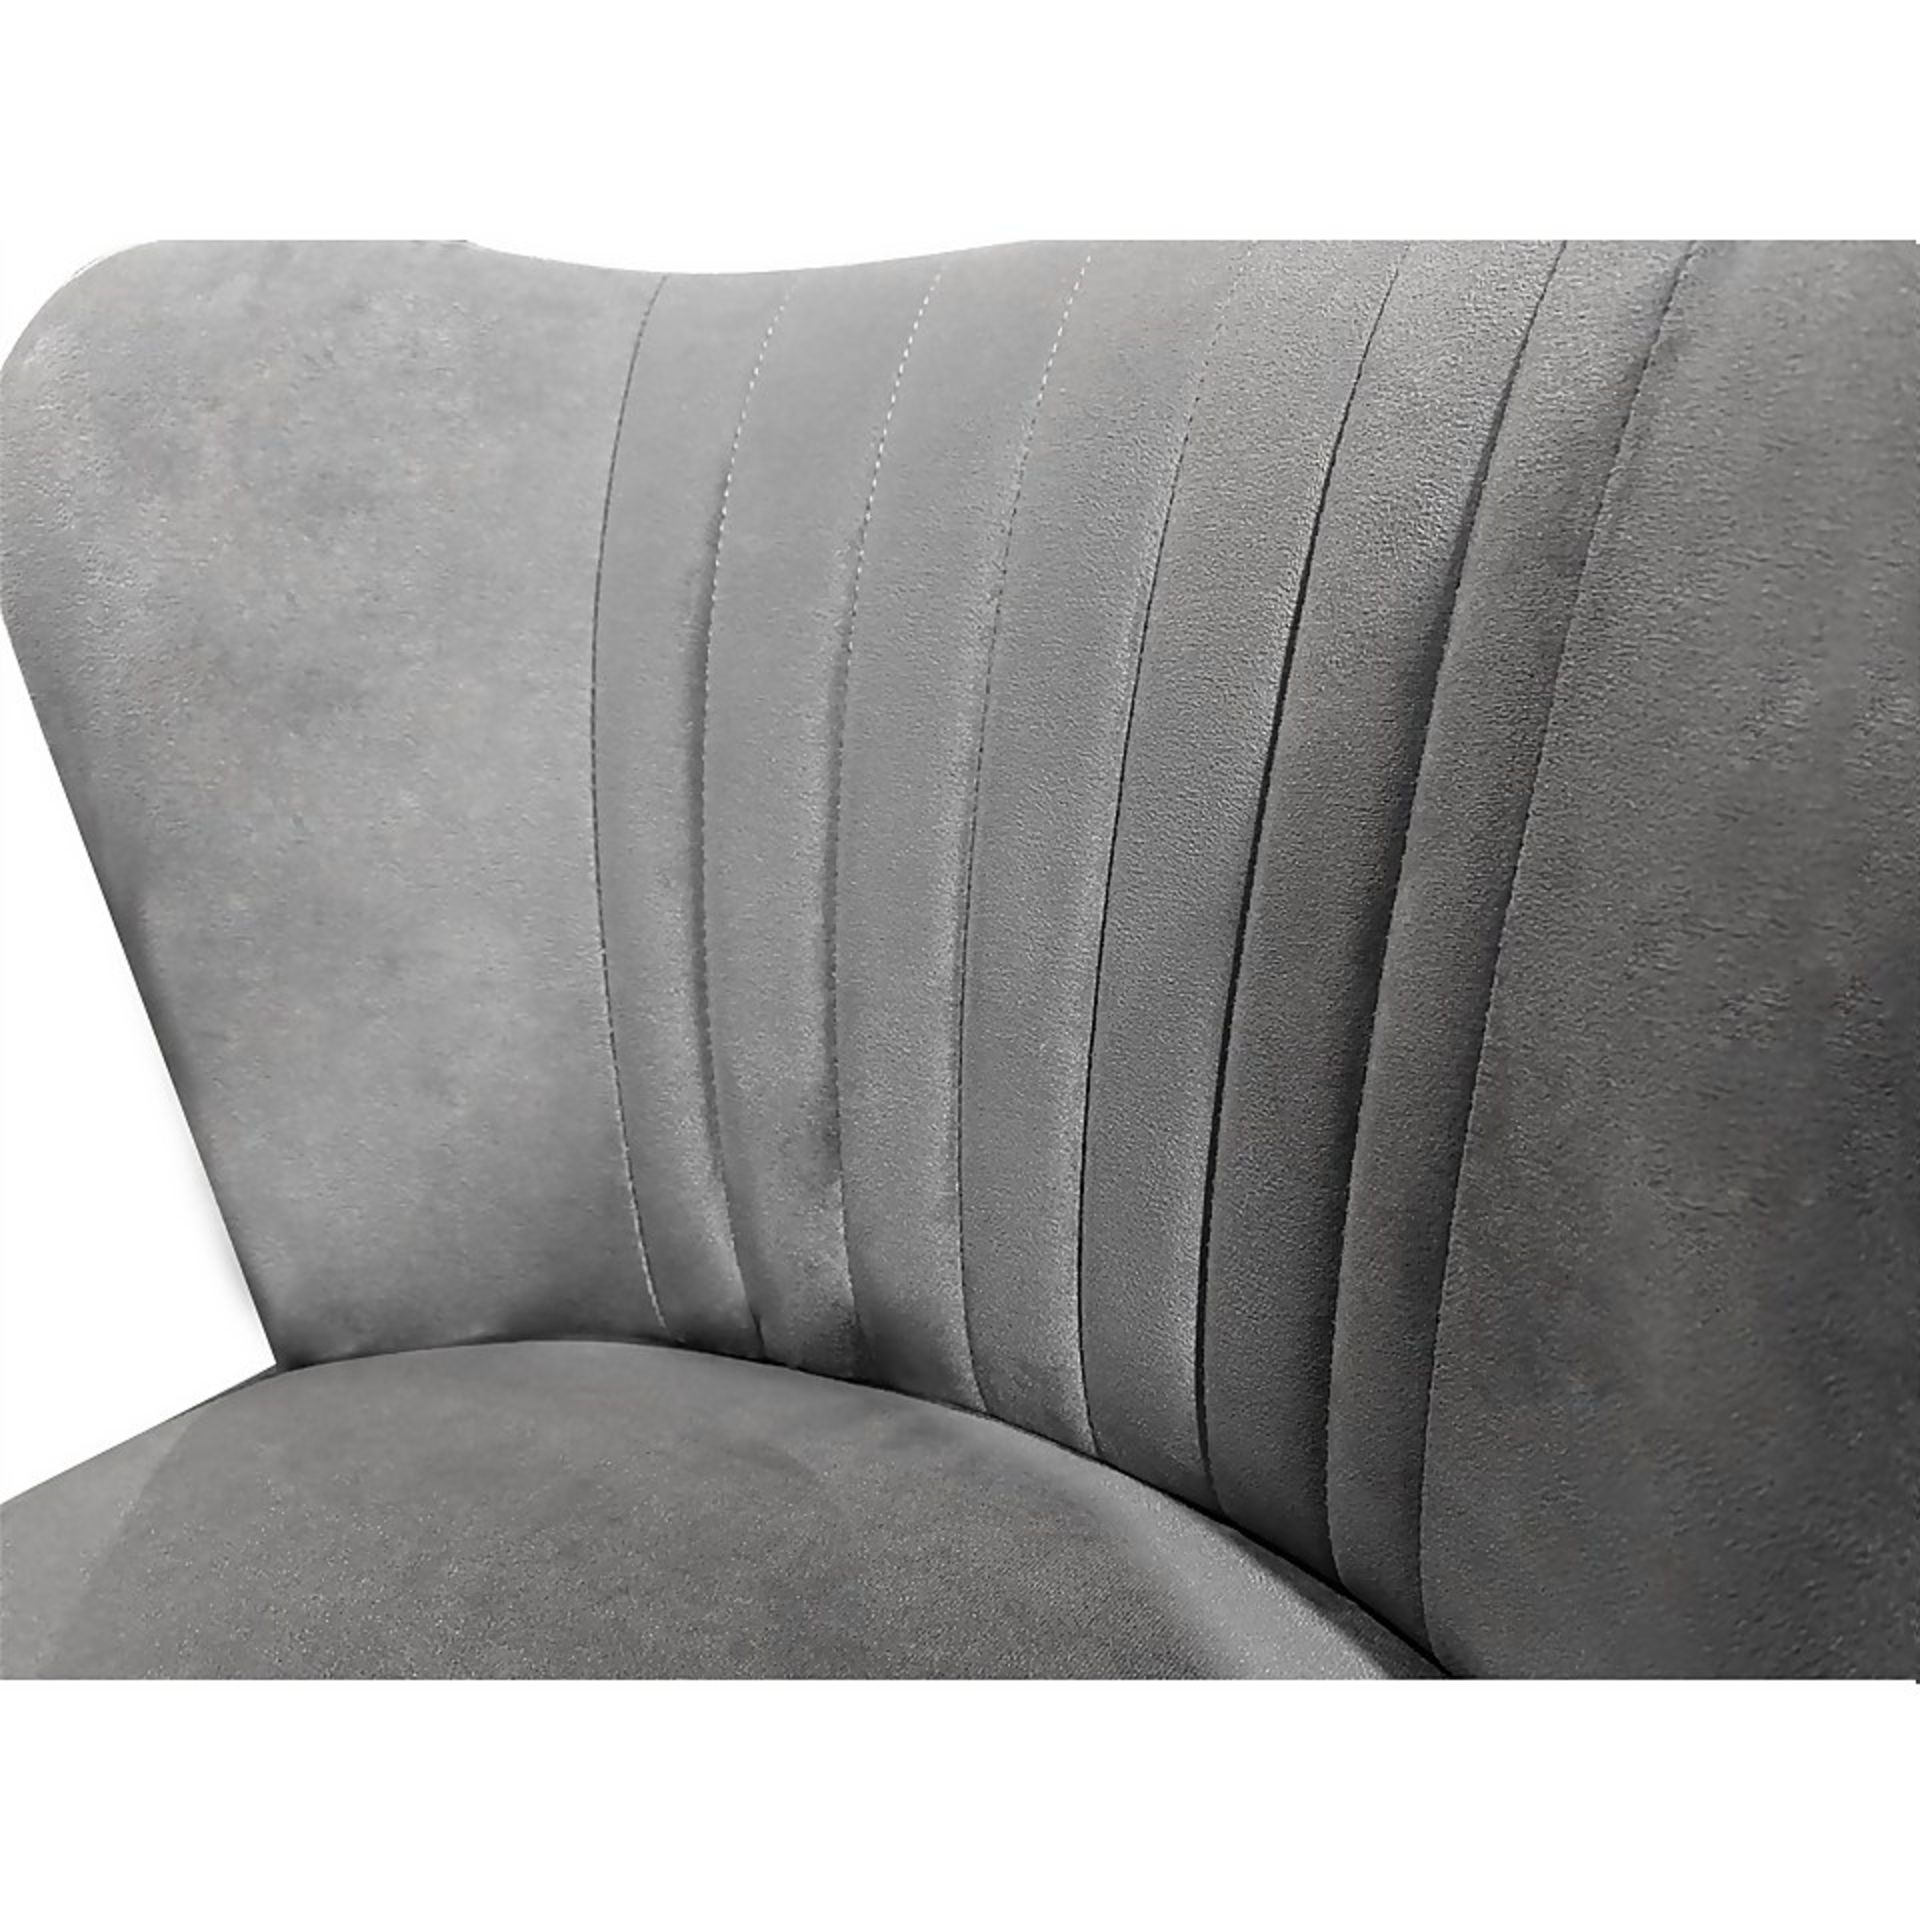 (R7N) 1 X Occasional Chair Grey. Velvet Fabric Cover. Rubberwood Legs. (H72xW60xD70cm) RRP £60 - Image 4 of 6